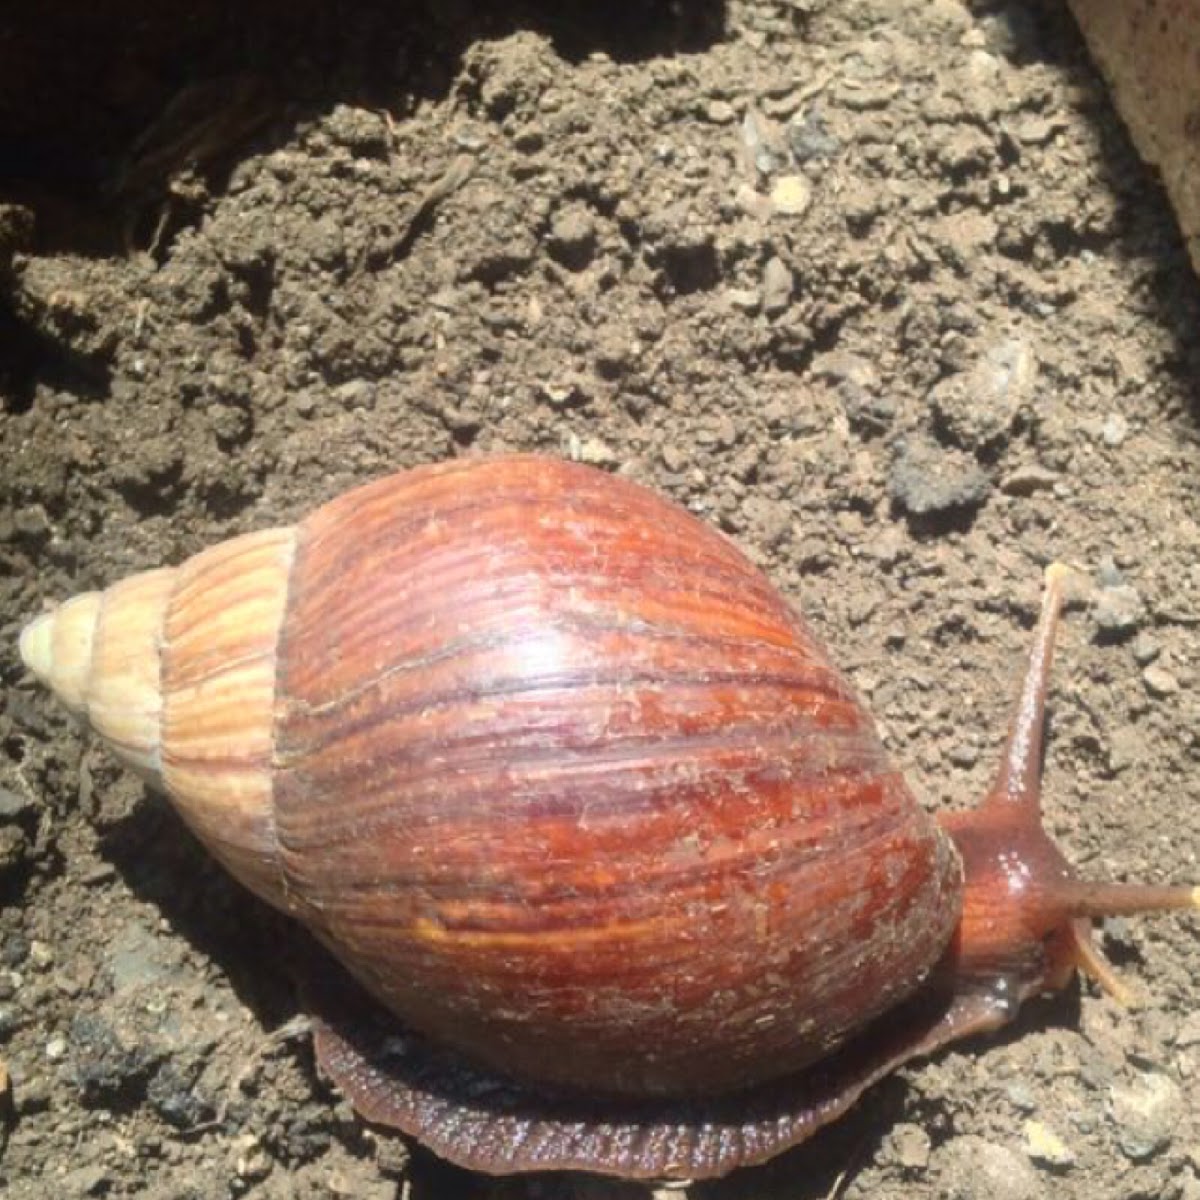 Giant African Snail